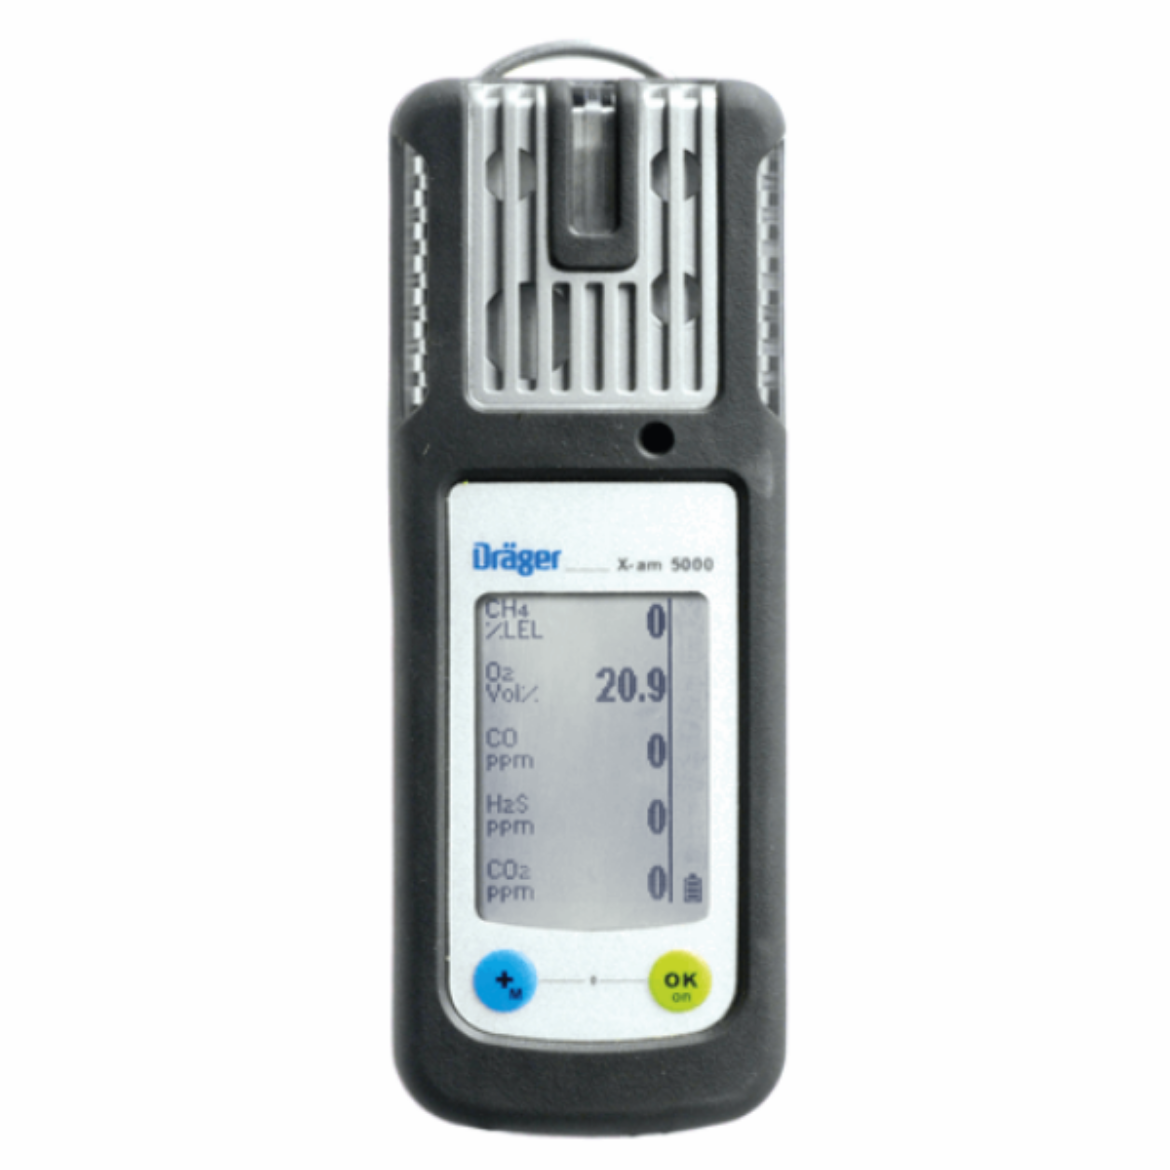 Picture of X-AM 5000 EX O2 CO H2S GAS DETECTOR INCL. BATTERY & POWER SUPPLY